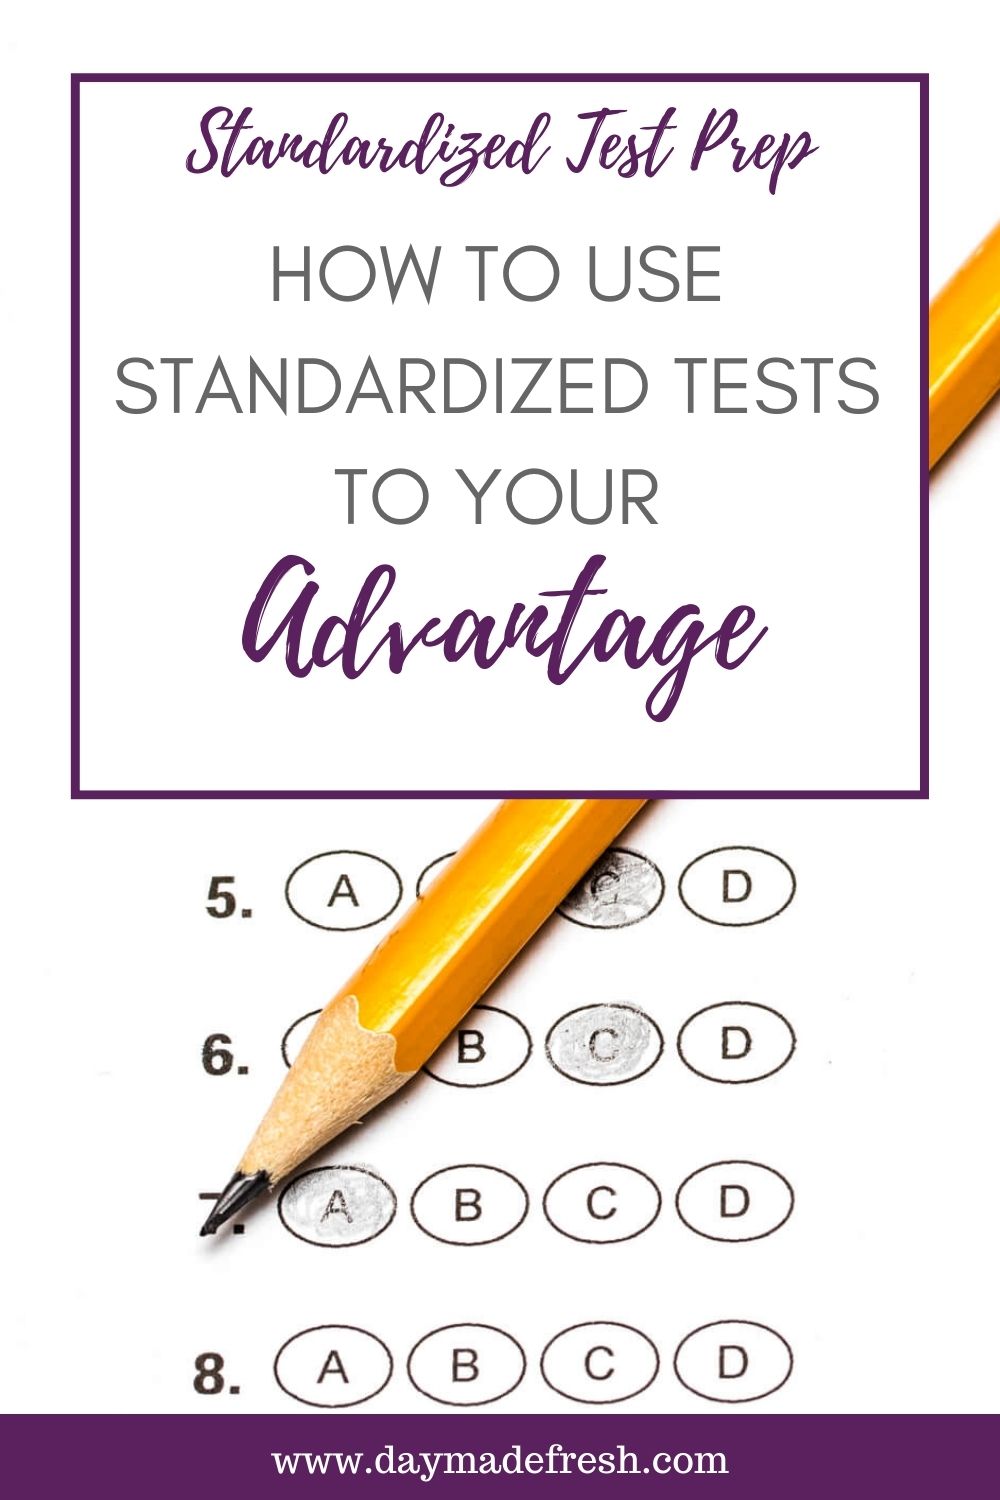 Image Text: Standardized Test Prep-How to Use Standardized Test To Your Advantage Image: Standardize Test Bubble Sheet